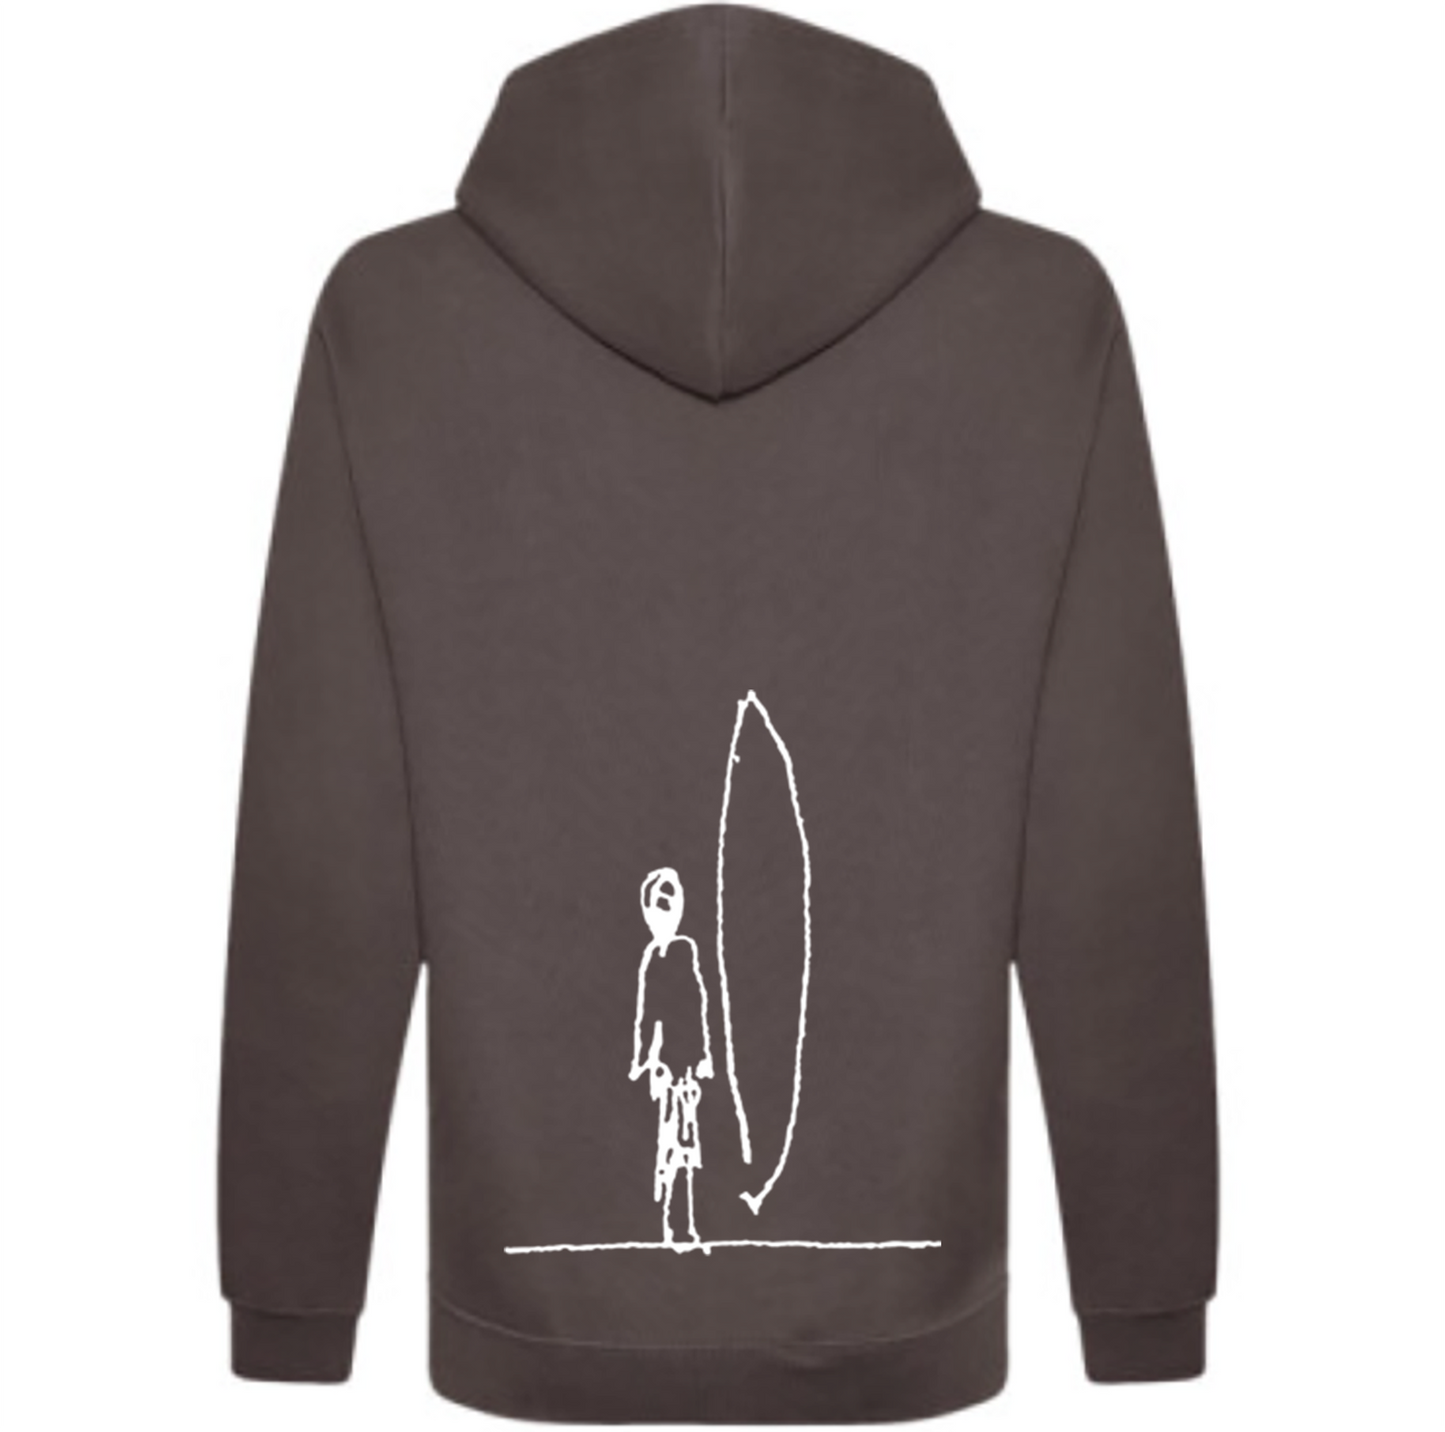 The Mistral - Organic Cotton Hooded sweater